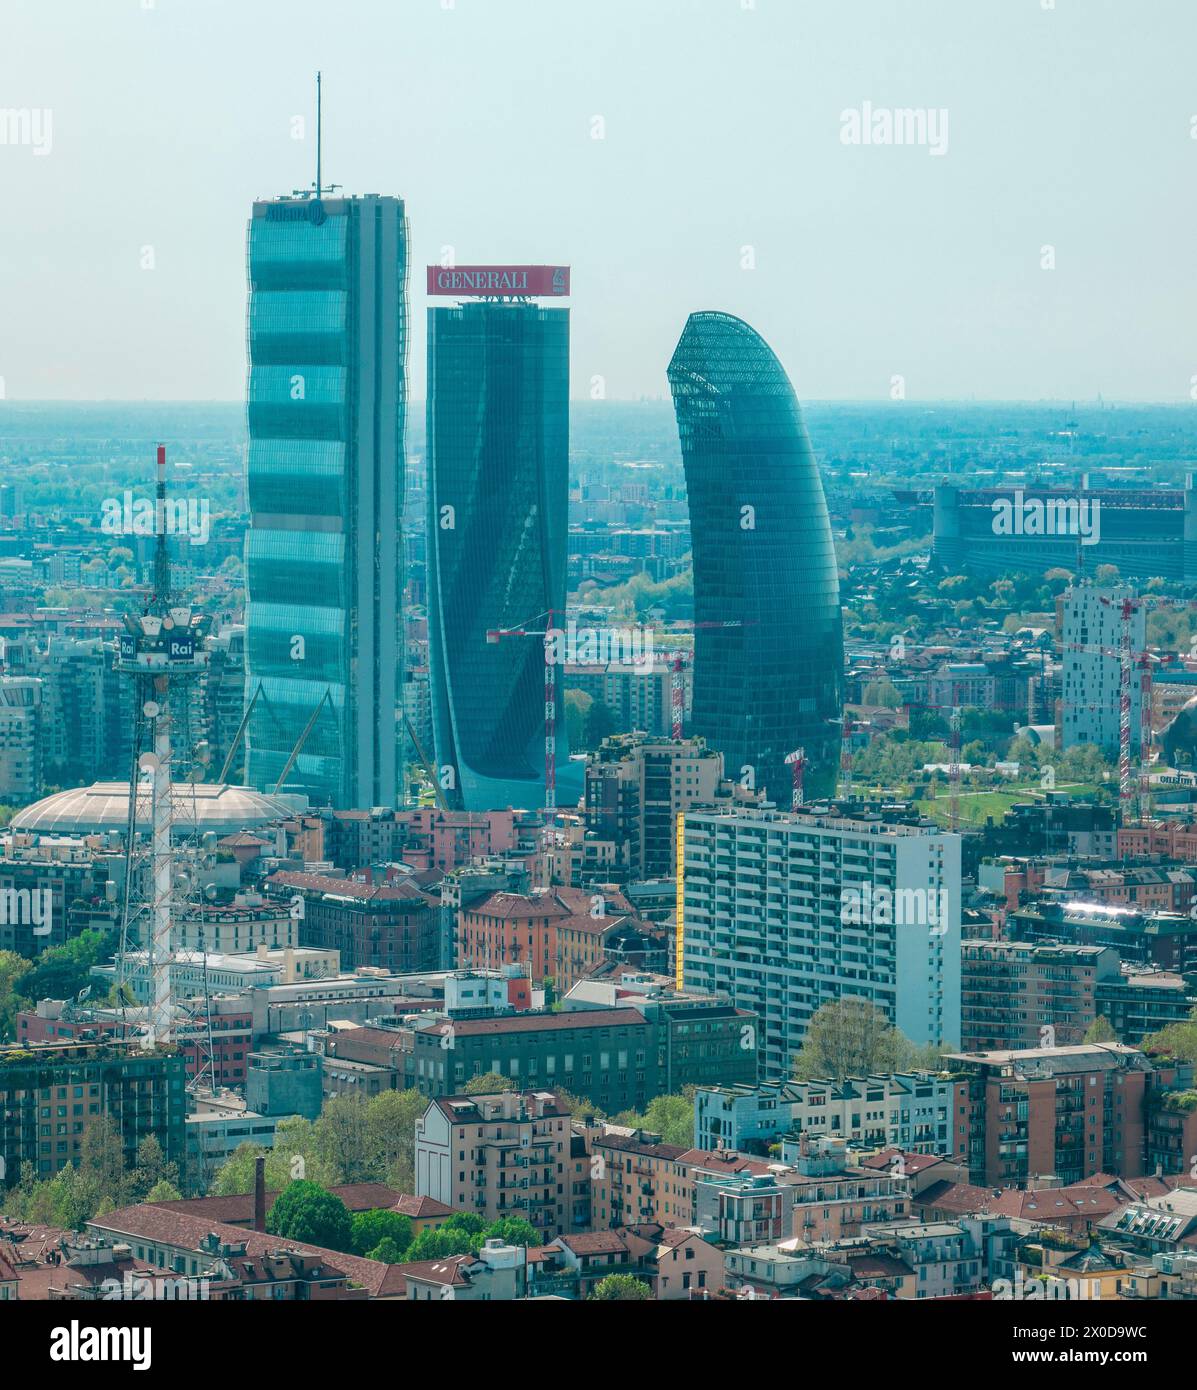 Aerial view of CityLife park with the three tower: The Straight One (Allianz Tower), The Twisted One (Generali Tower), The Curved One, Milan, italy Stock Photo